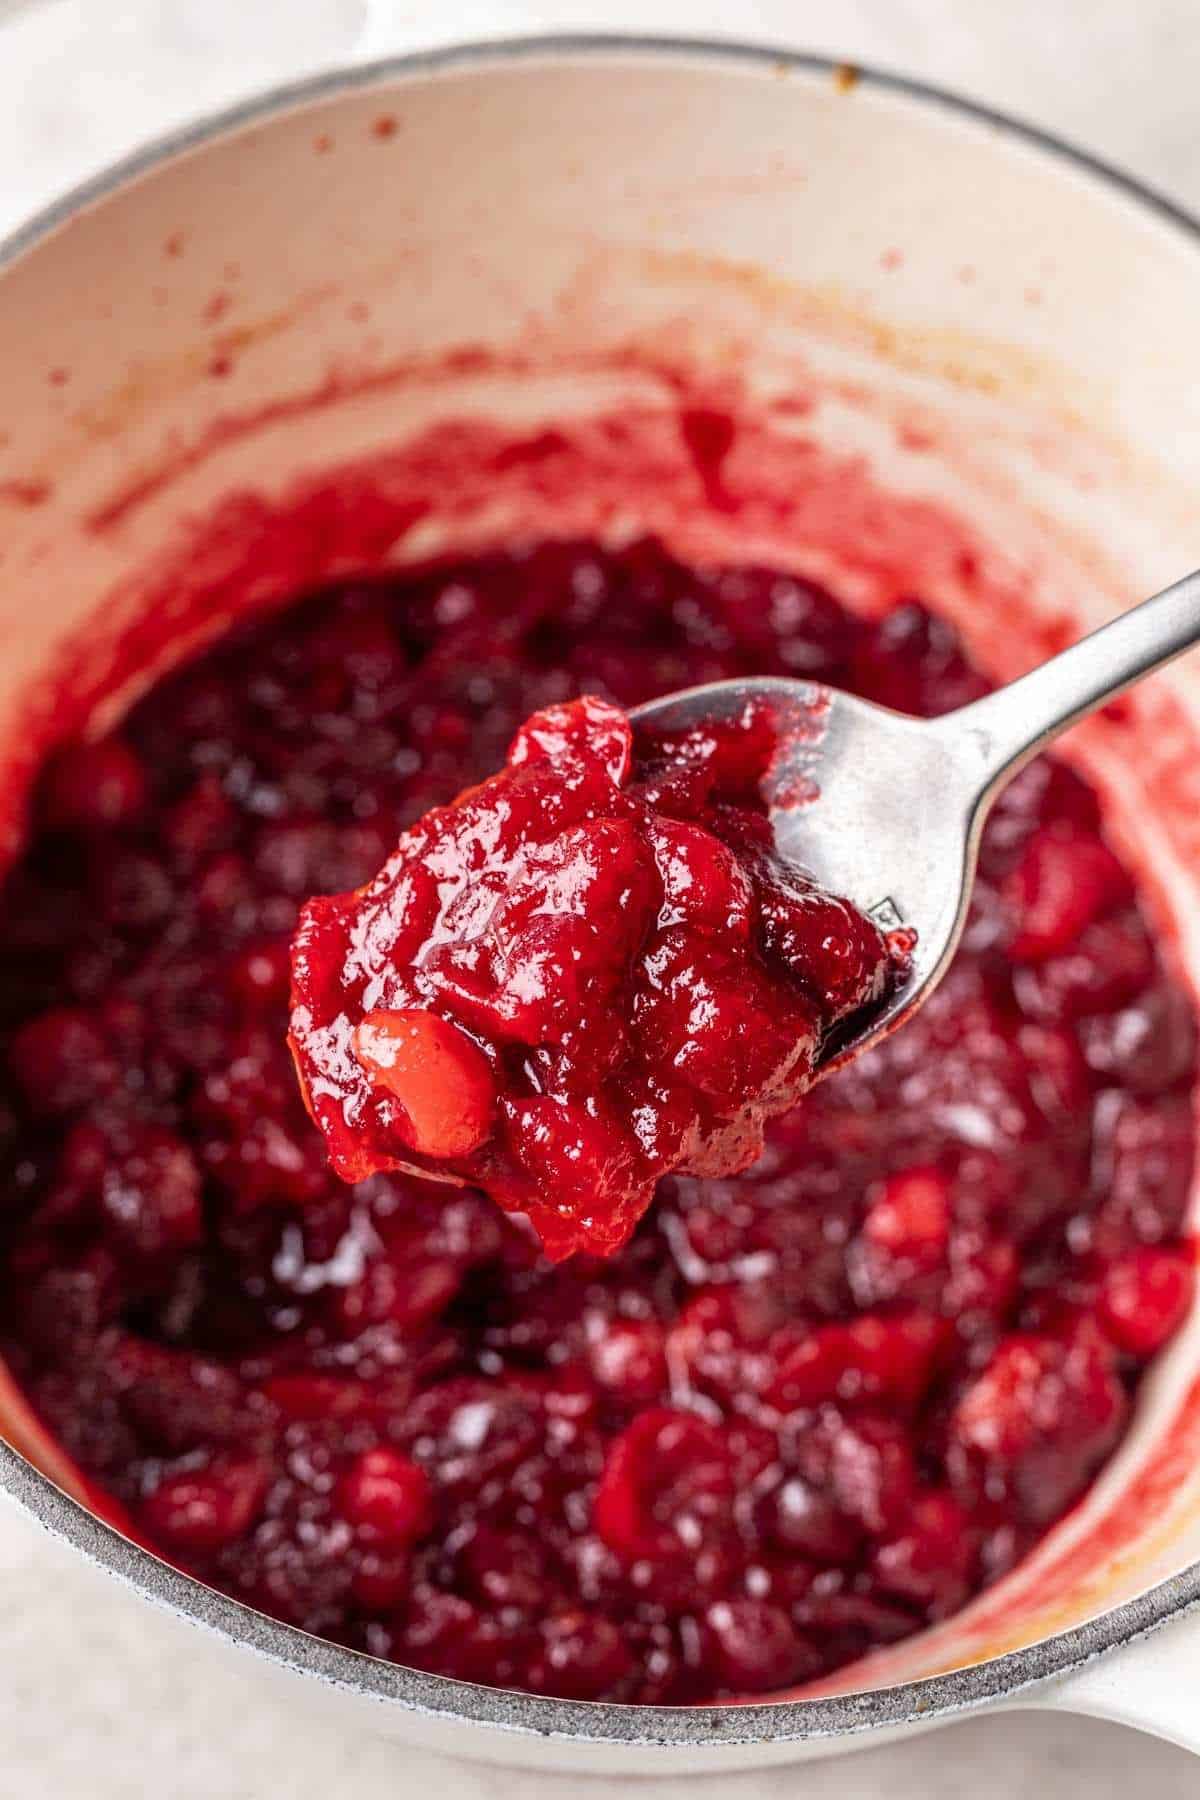 Texture of cranberry sauce after 10-15 minutes of cooking.